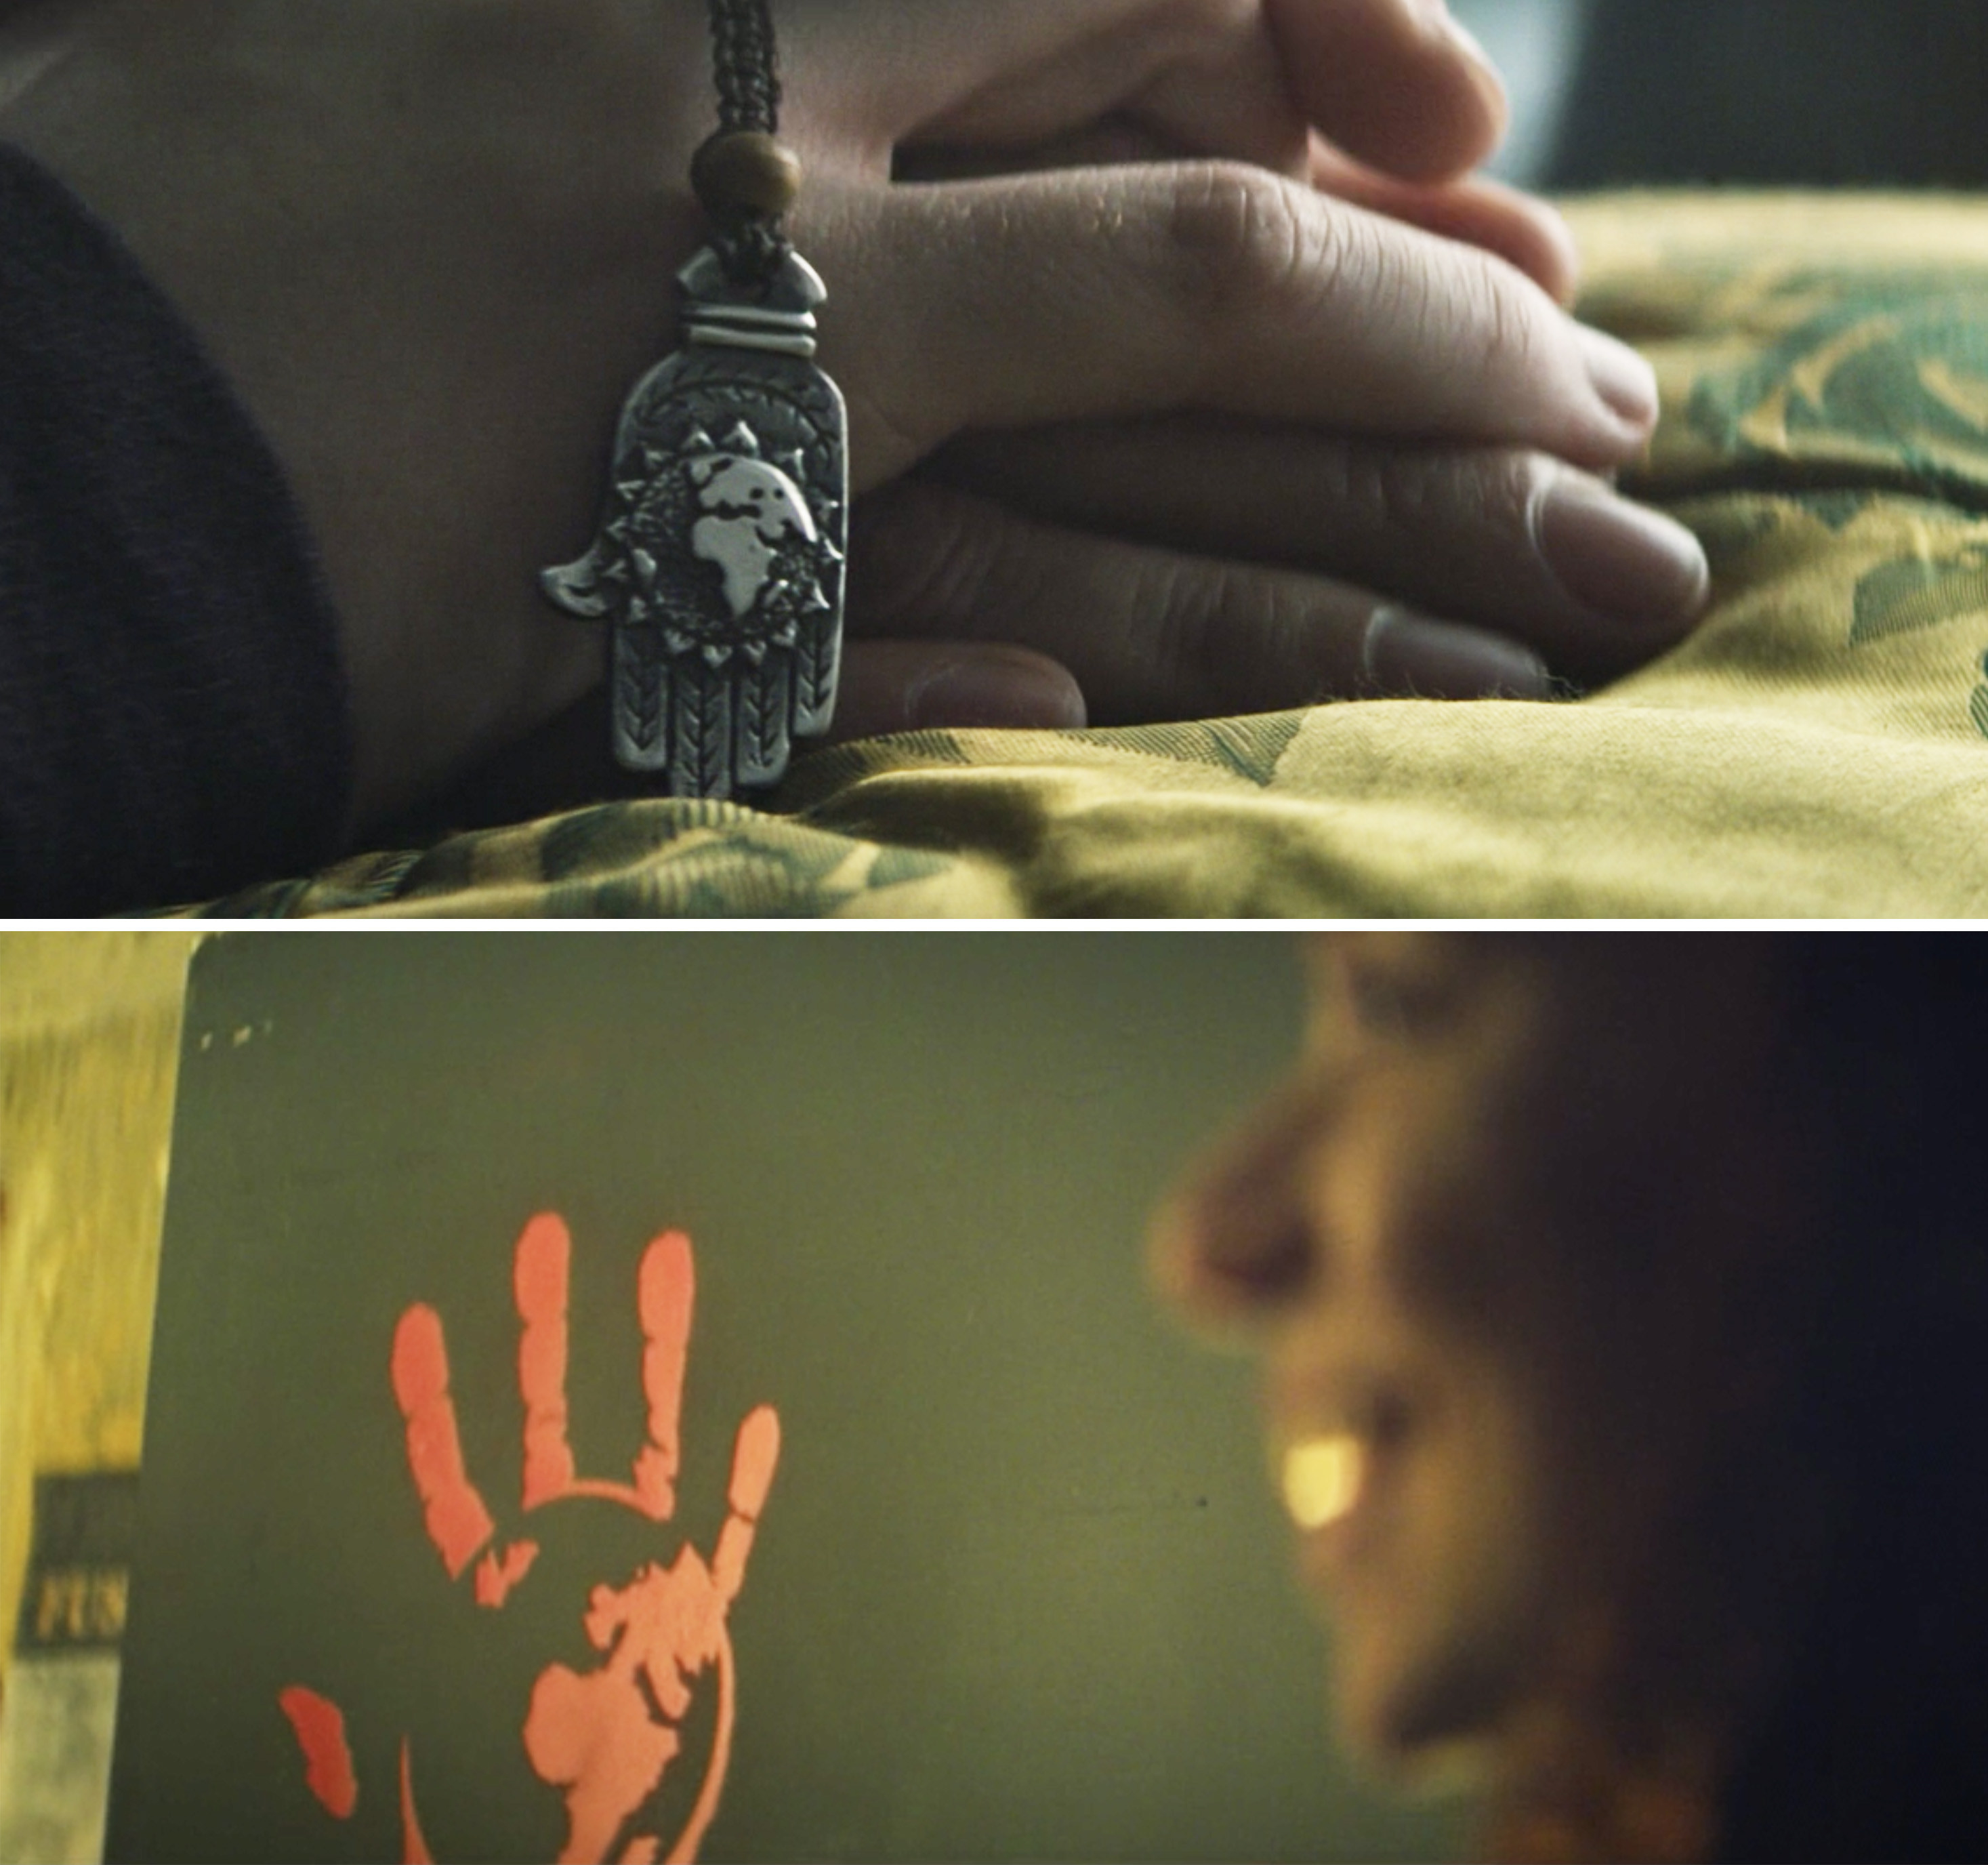 A close-up of Karli&#x27;s hand necklace vs. the Flag Smashers red hand logo